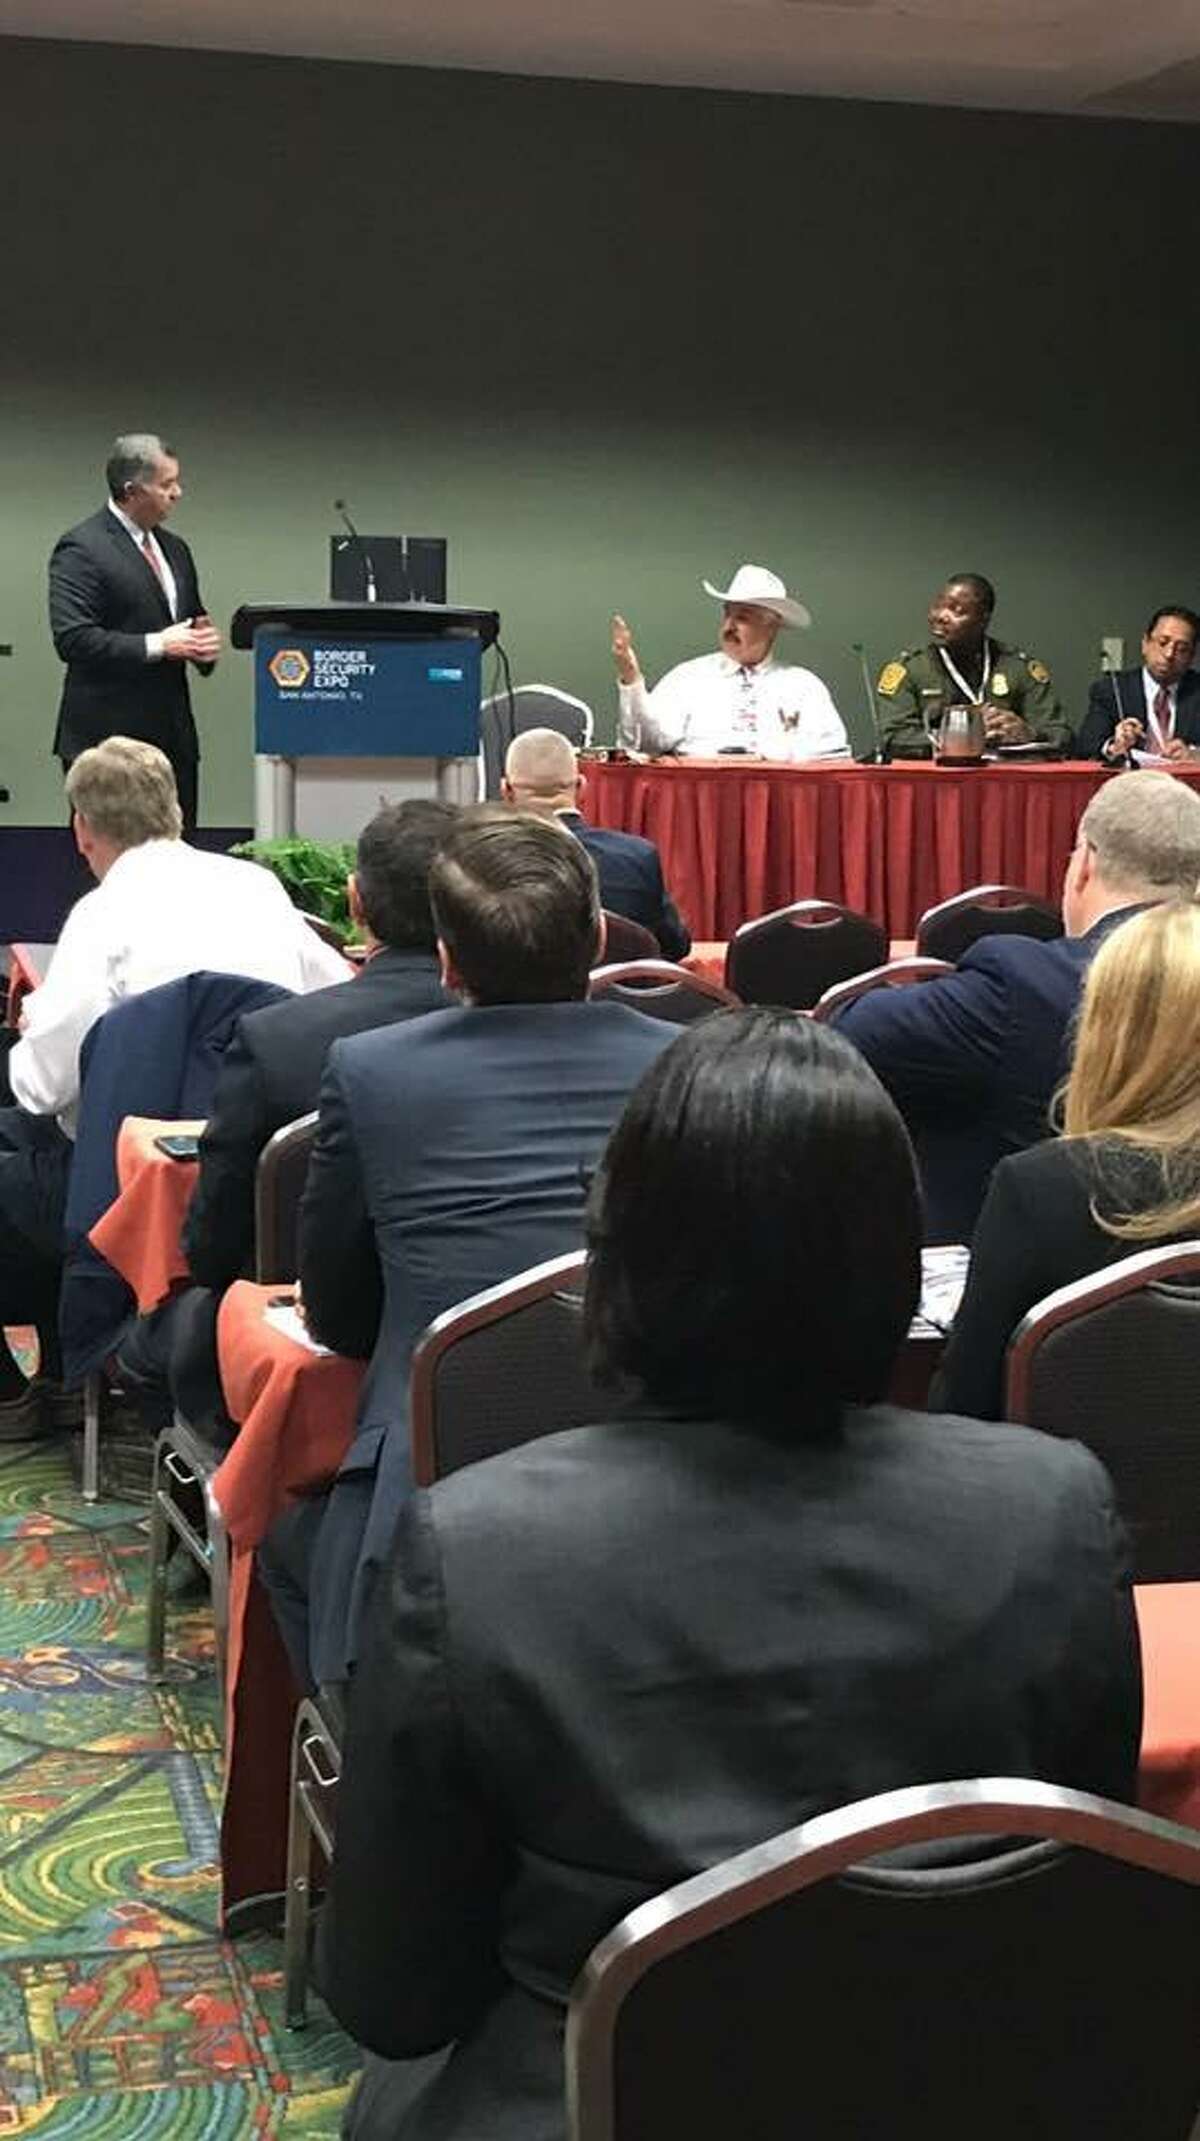 Webb County Sheriff Martin Cuellar served as a panelist in the Border Security Expo that took place in San Antonio this week.